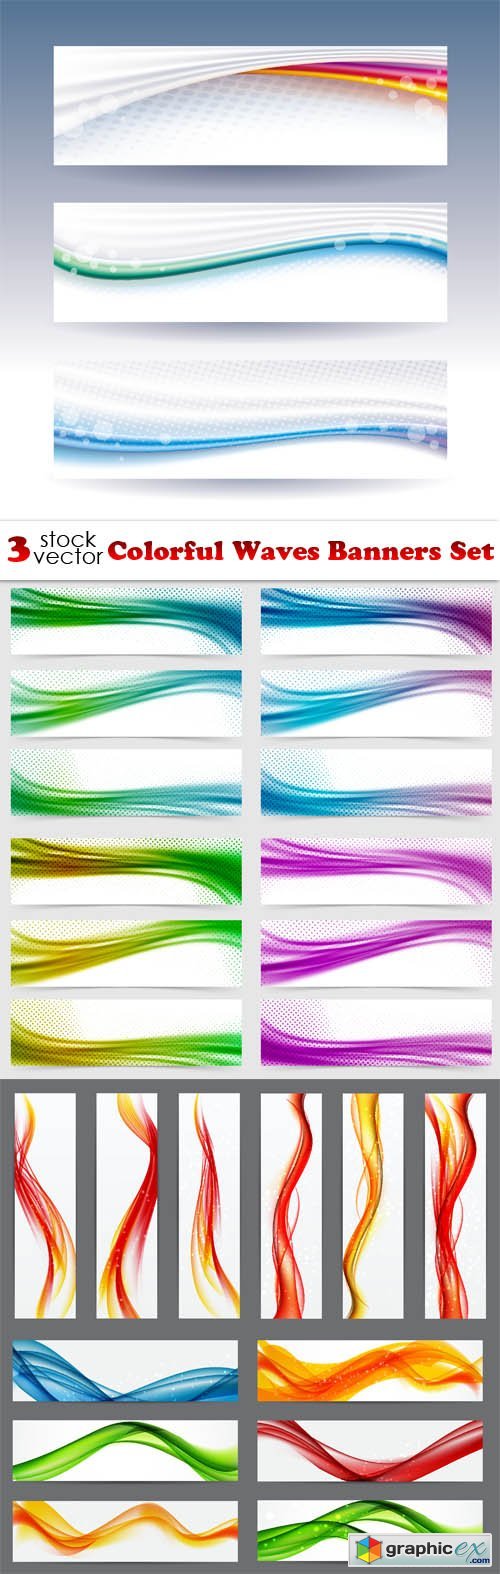 Colorful Waves Banners Set